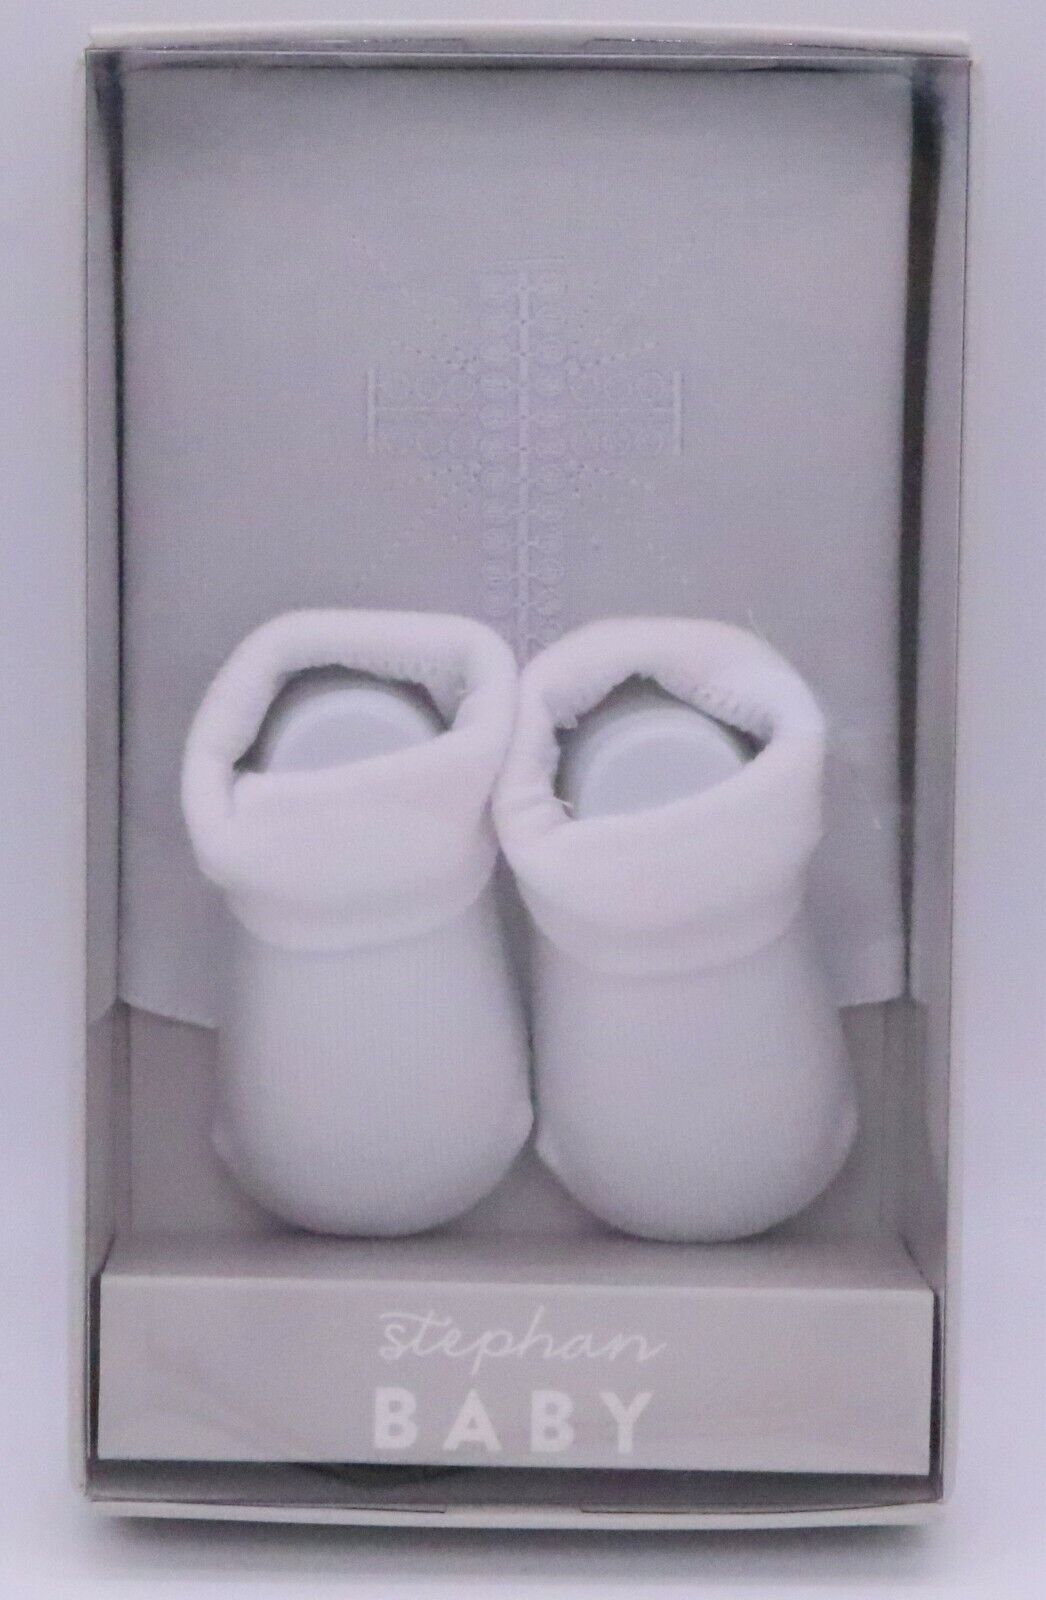 Stephan Baby Christening Baptism Bib Booties Gift Set White With Cross Embroider